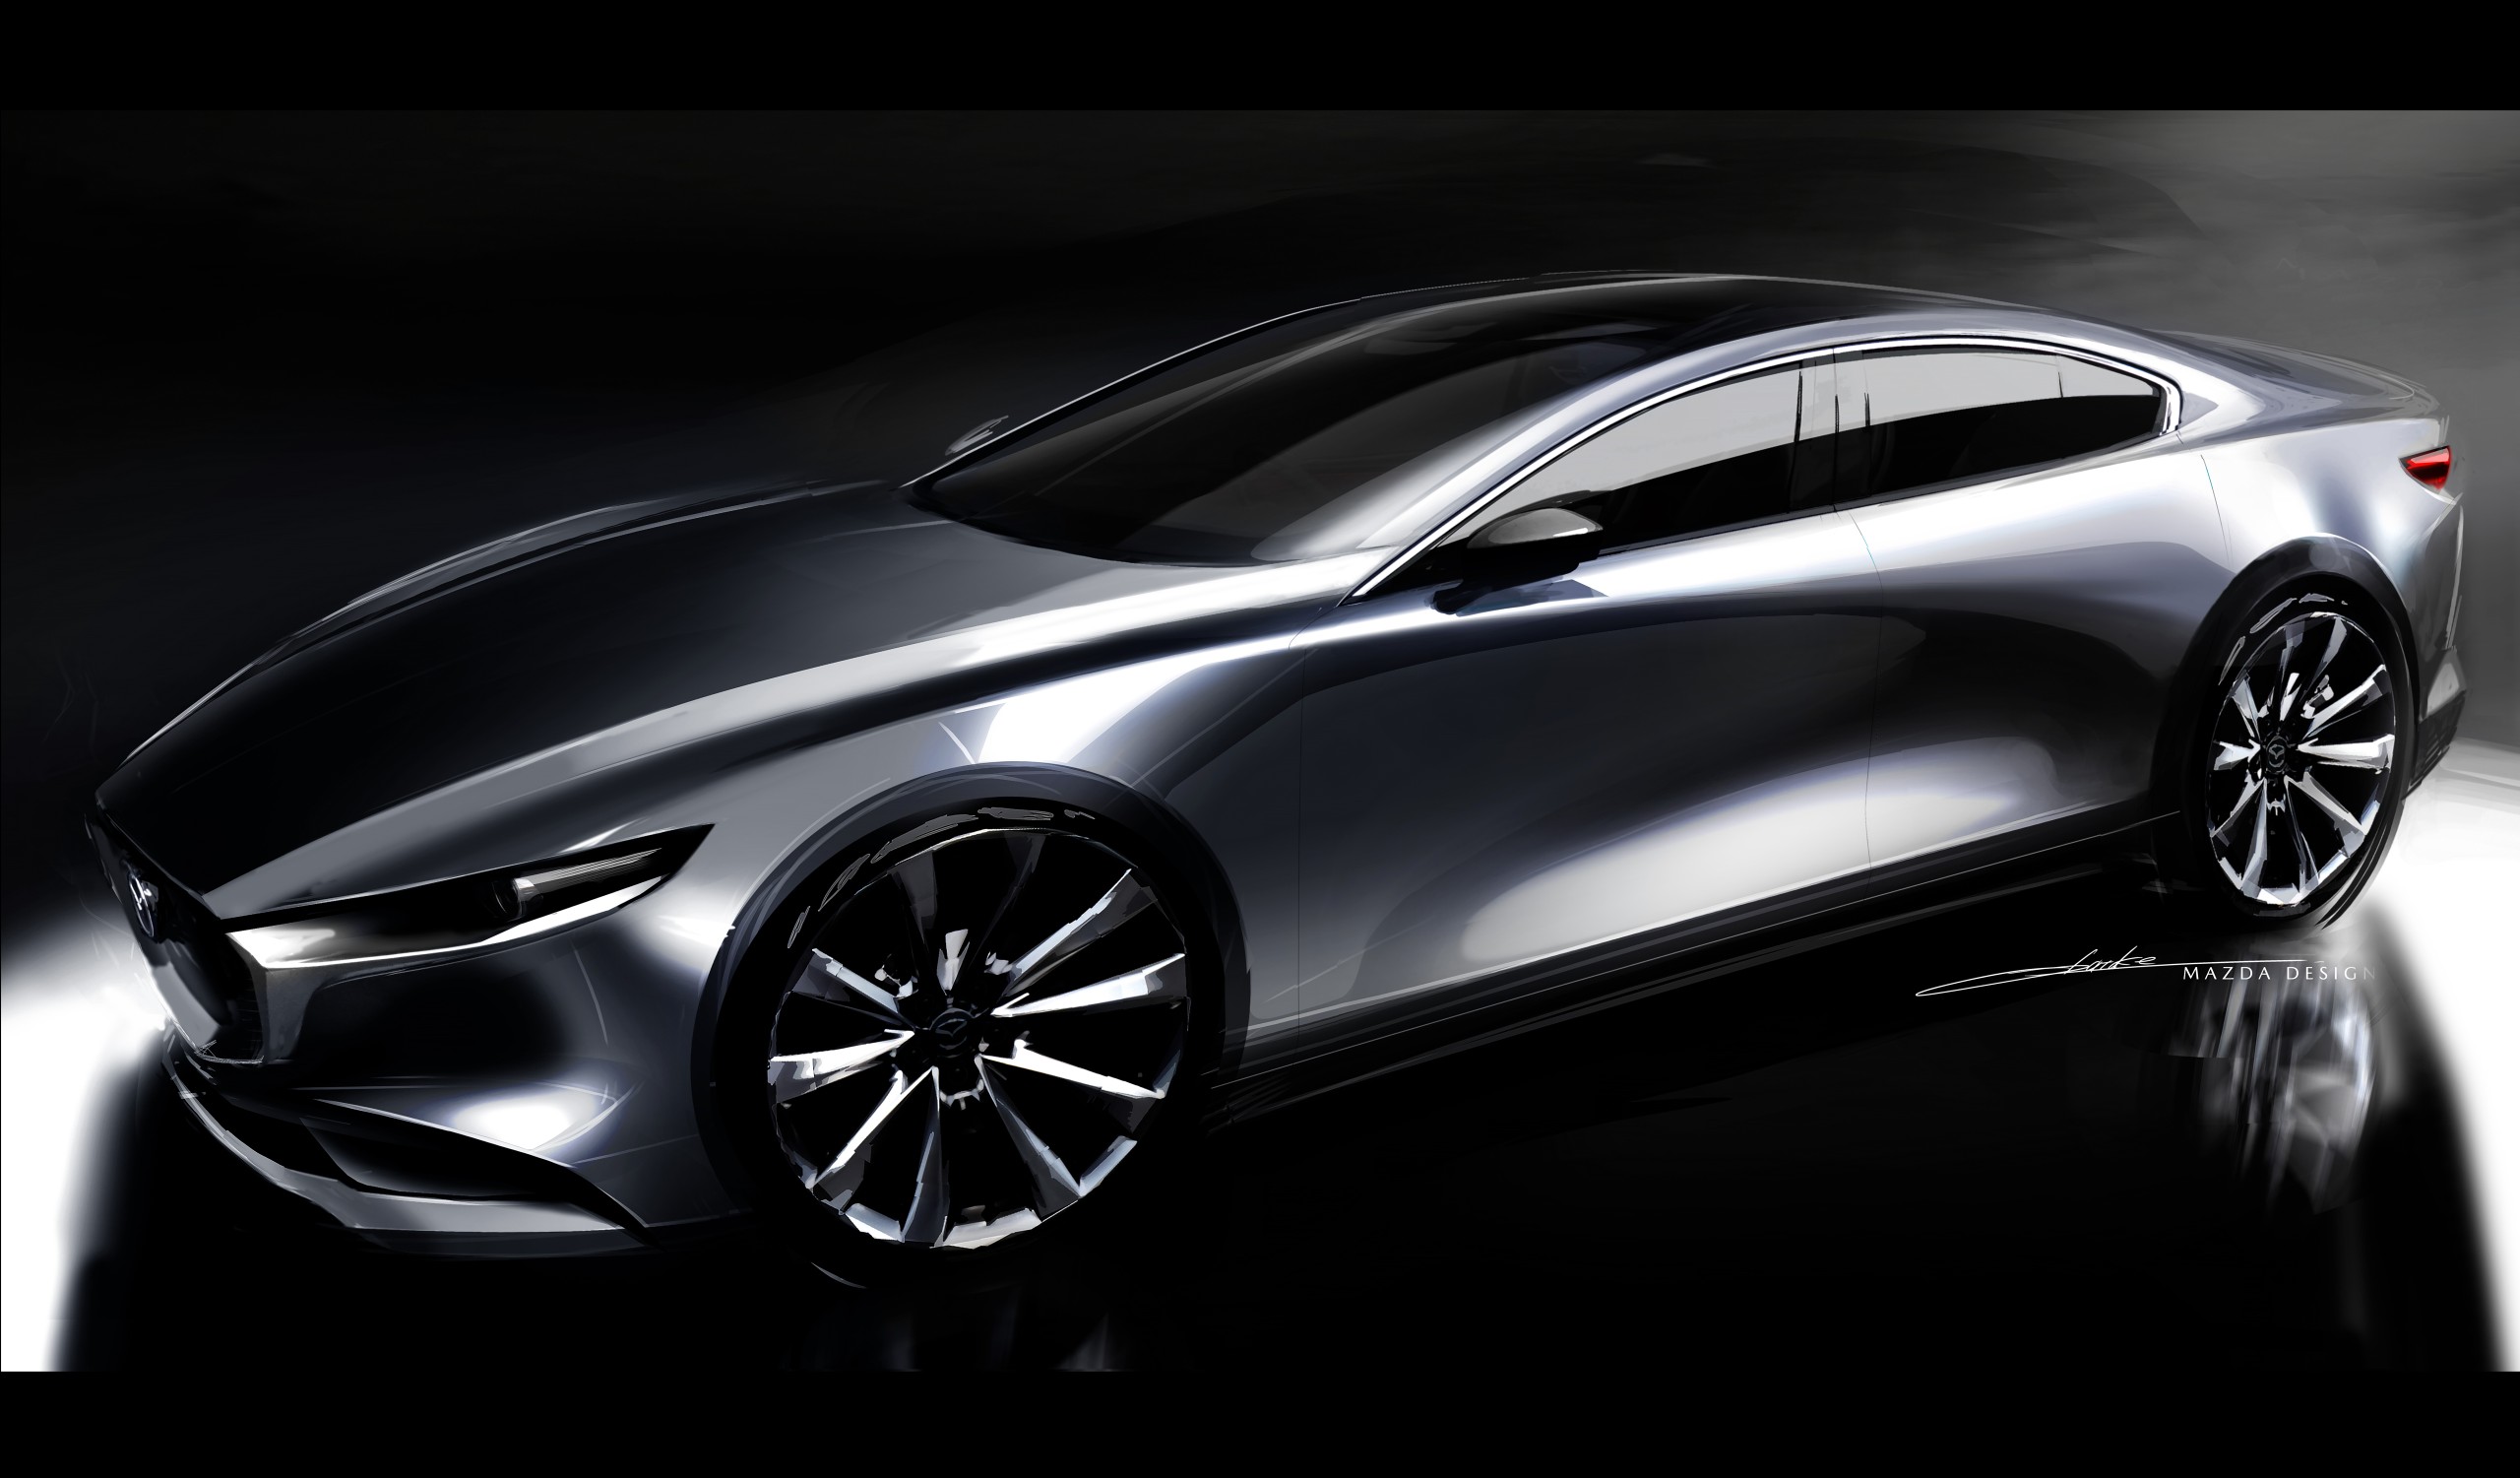 34_All-New-Mazda3_SDN_Sketch_Front